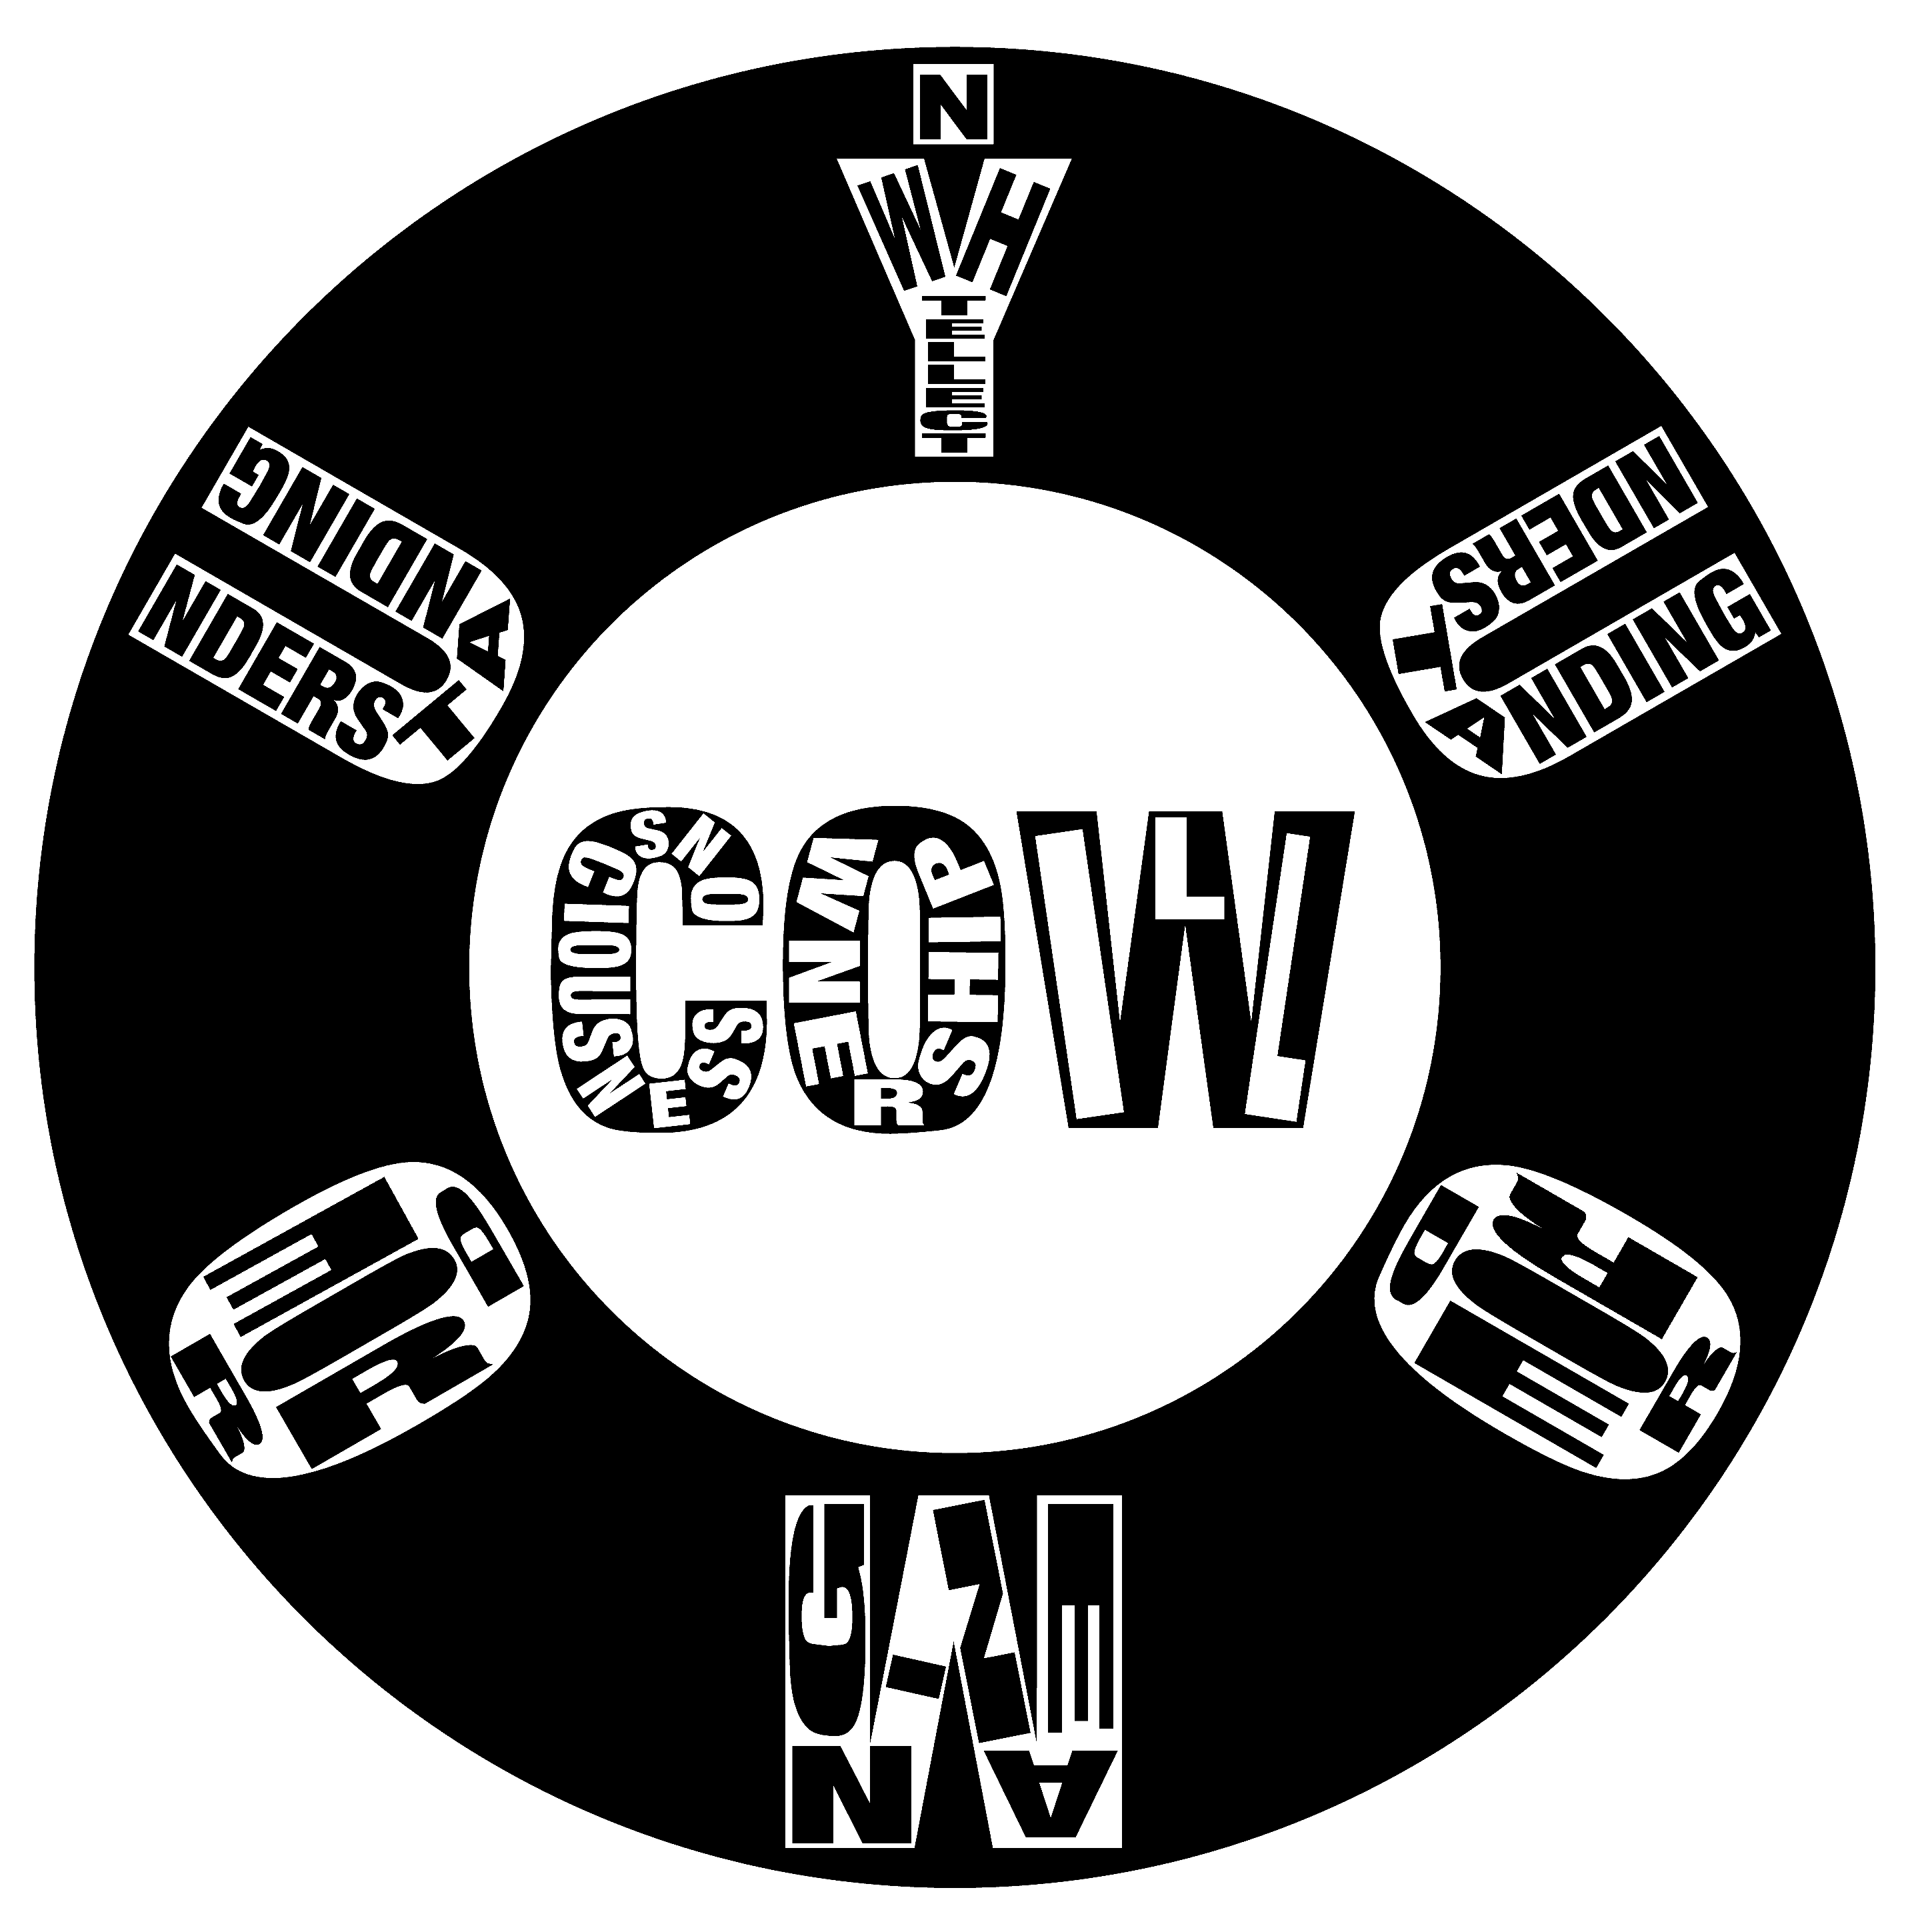 YUOMOUiMOUYUOM/MOUYUOMOUi COW Curve--Graphronymic rendition of Scientology's "Tone Scale"